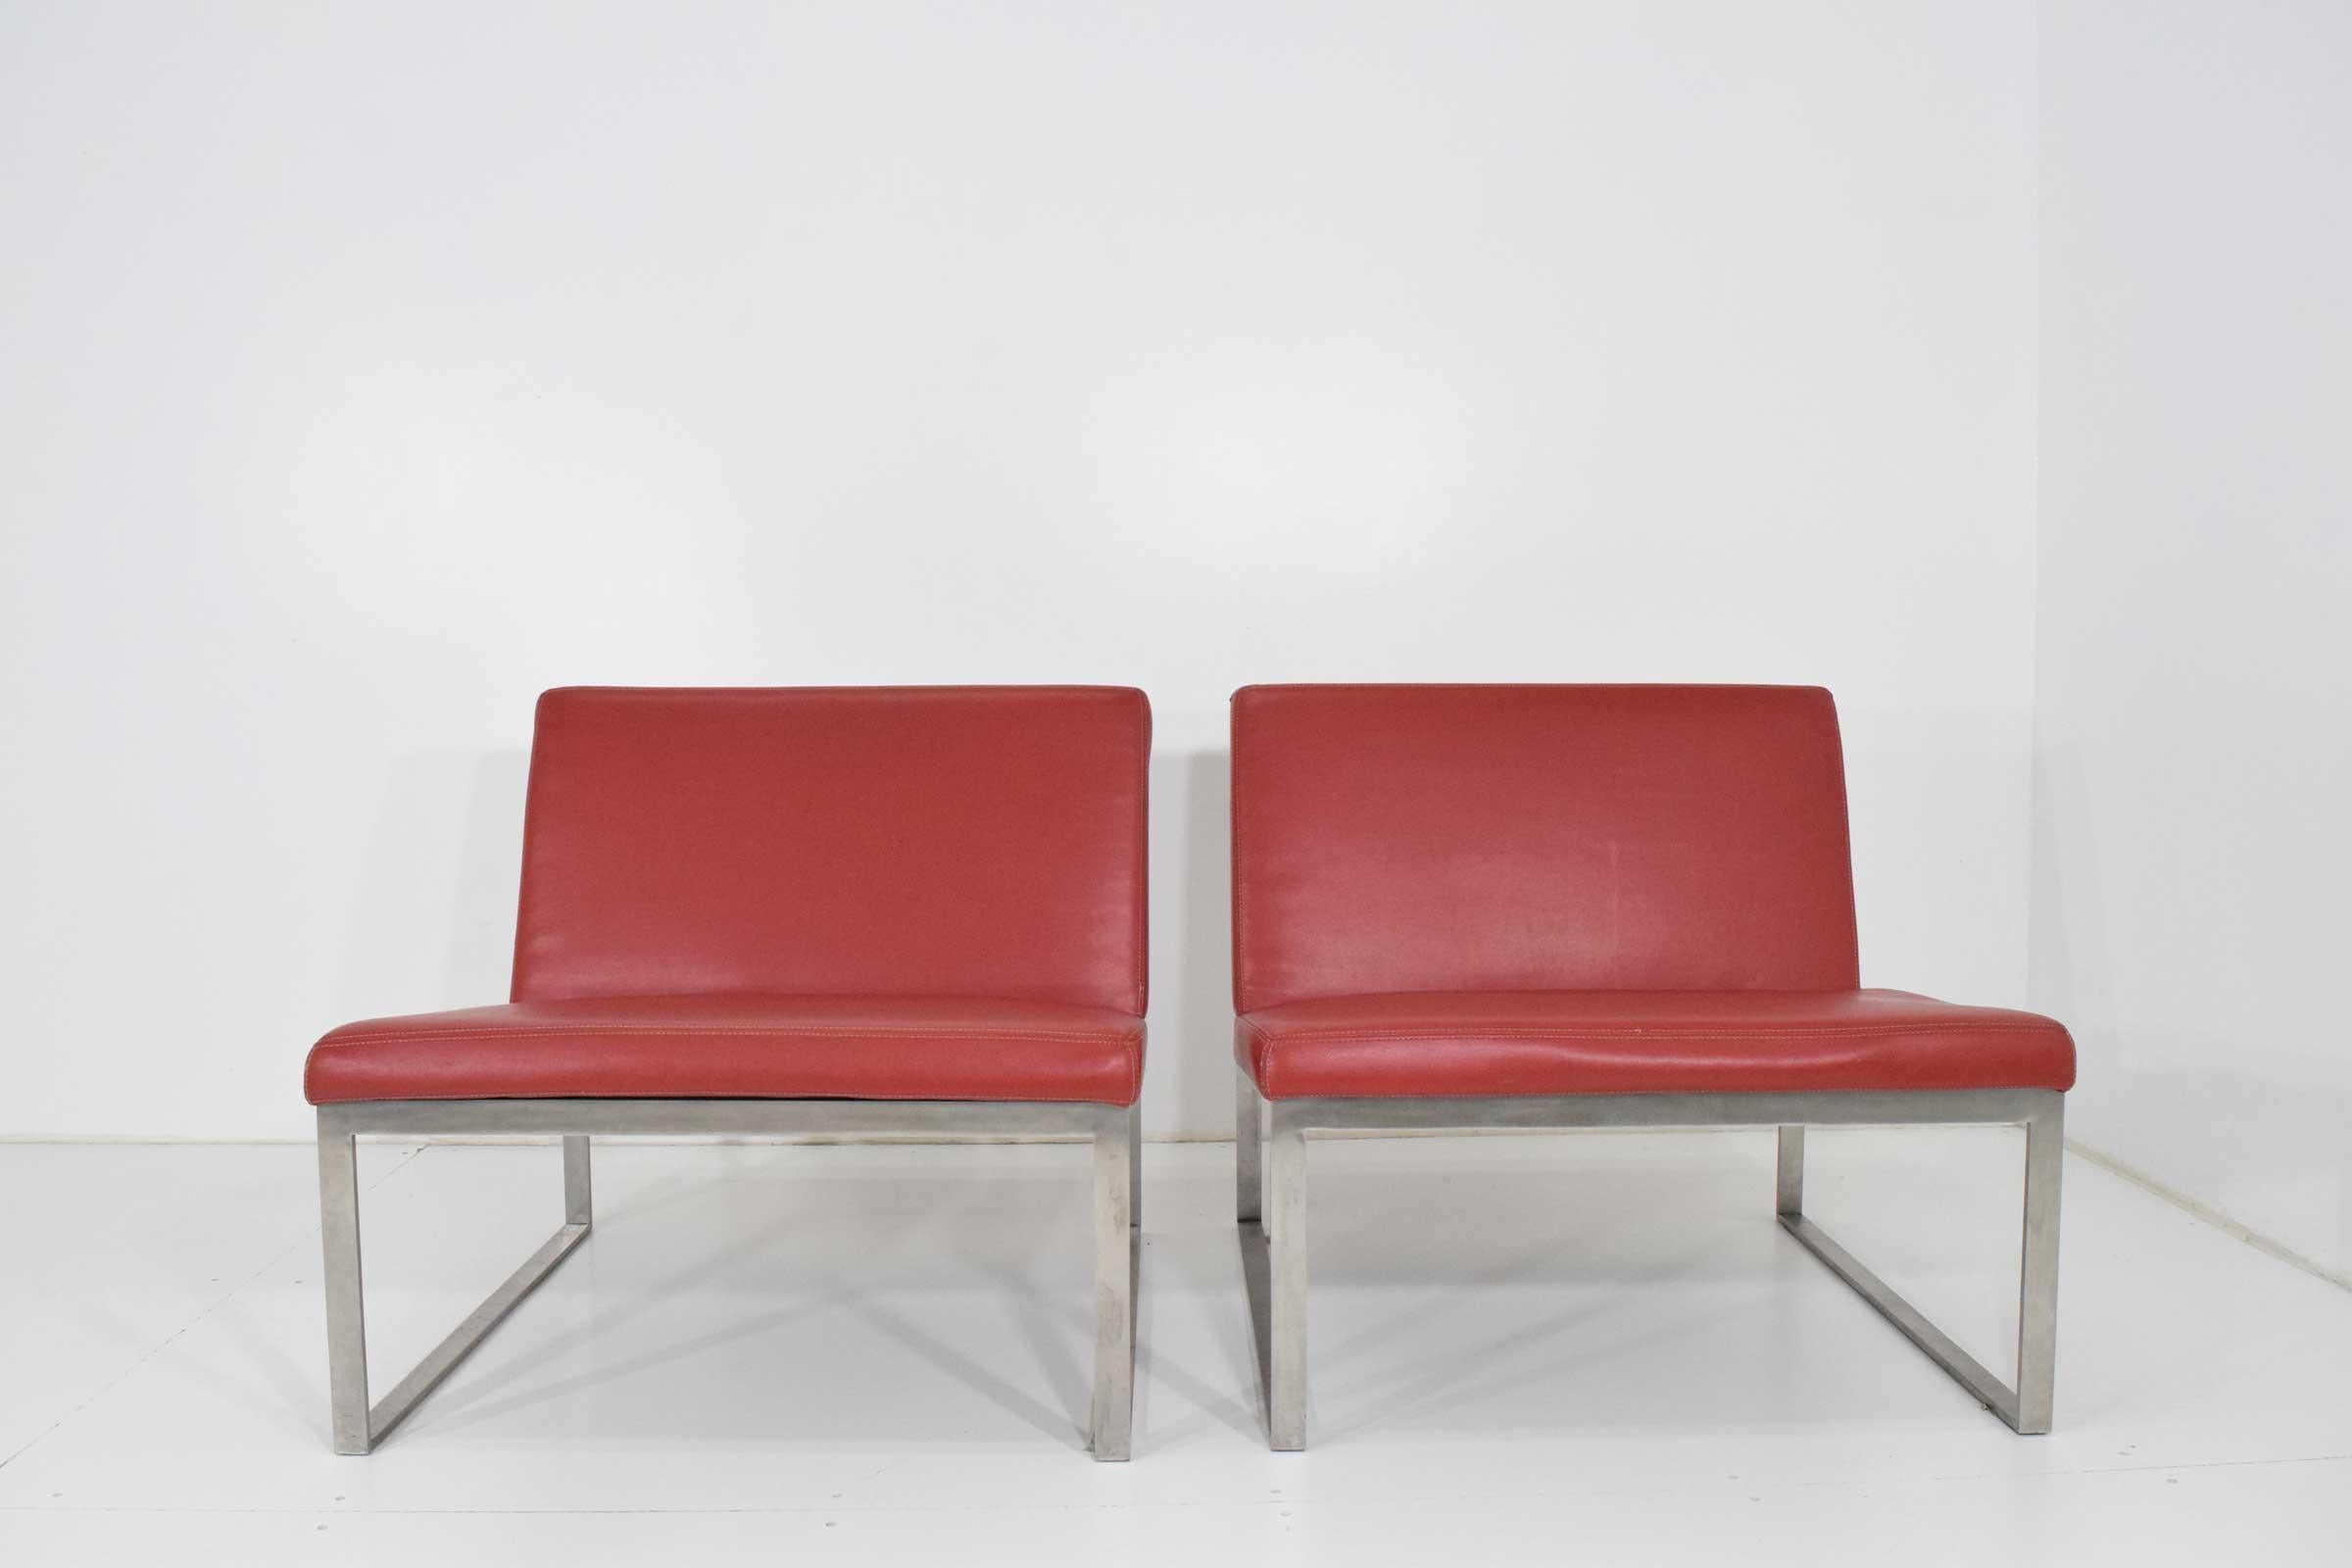 Chairs have an aluminum frame. Red vinyl upholstery. A few wear marks that can probably be expertly repaired if desired or chairs can be newly upholstered.